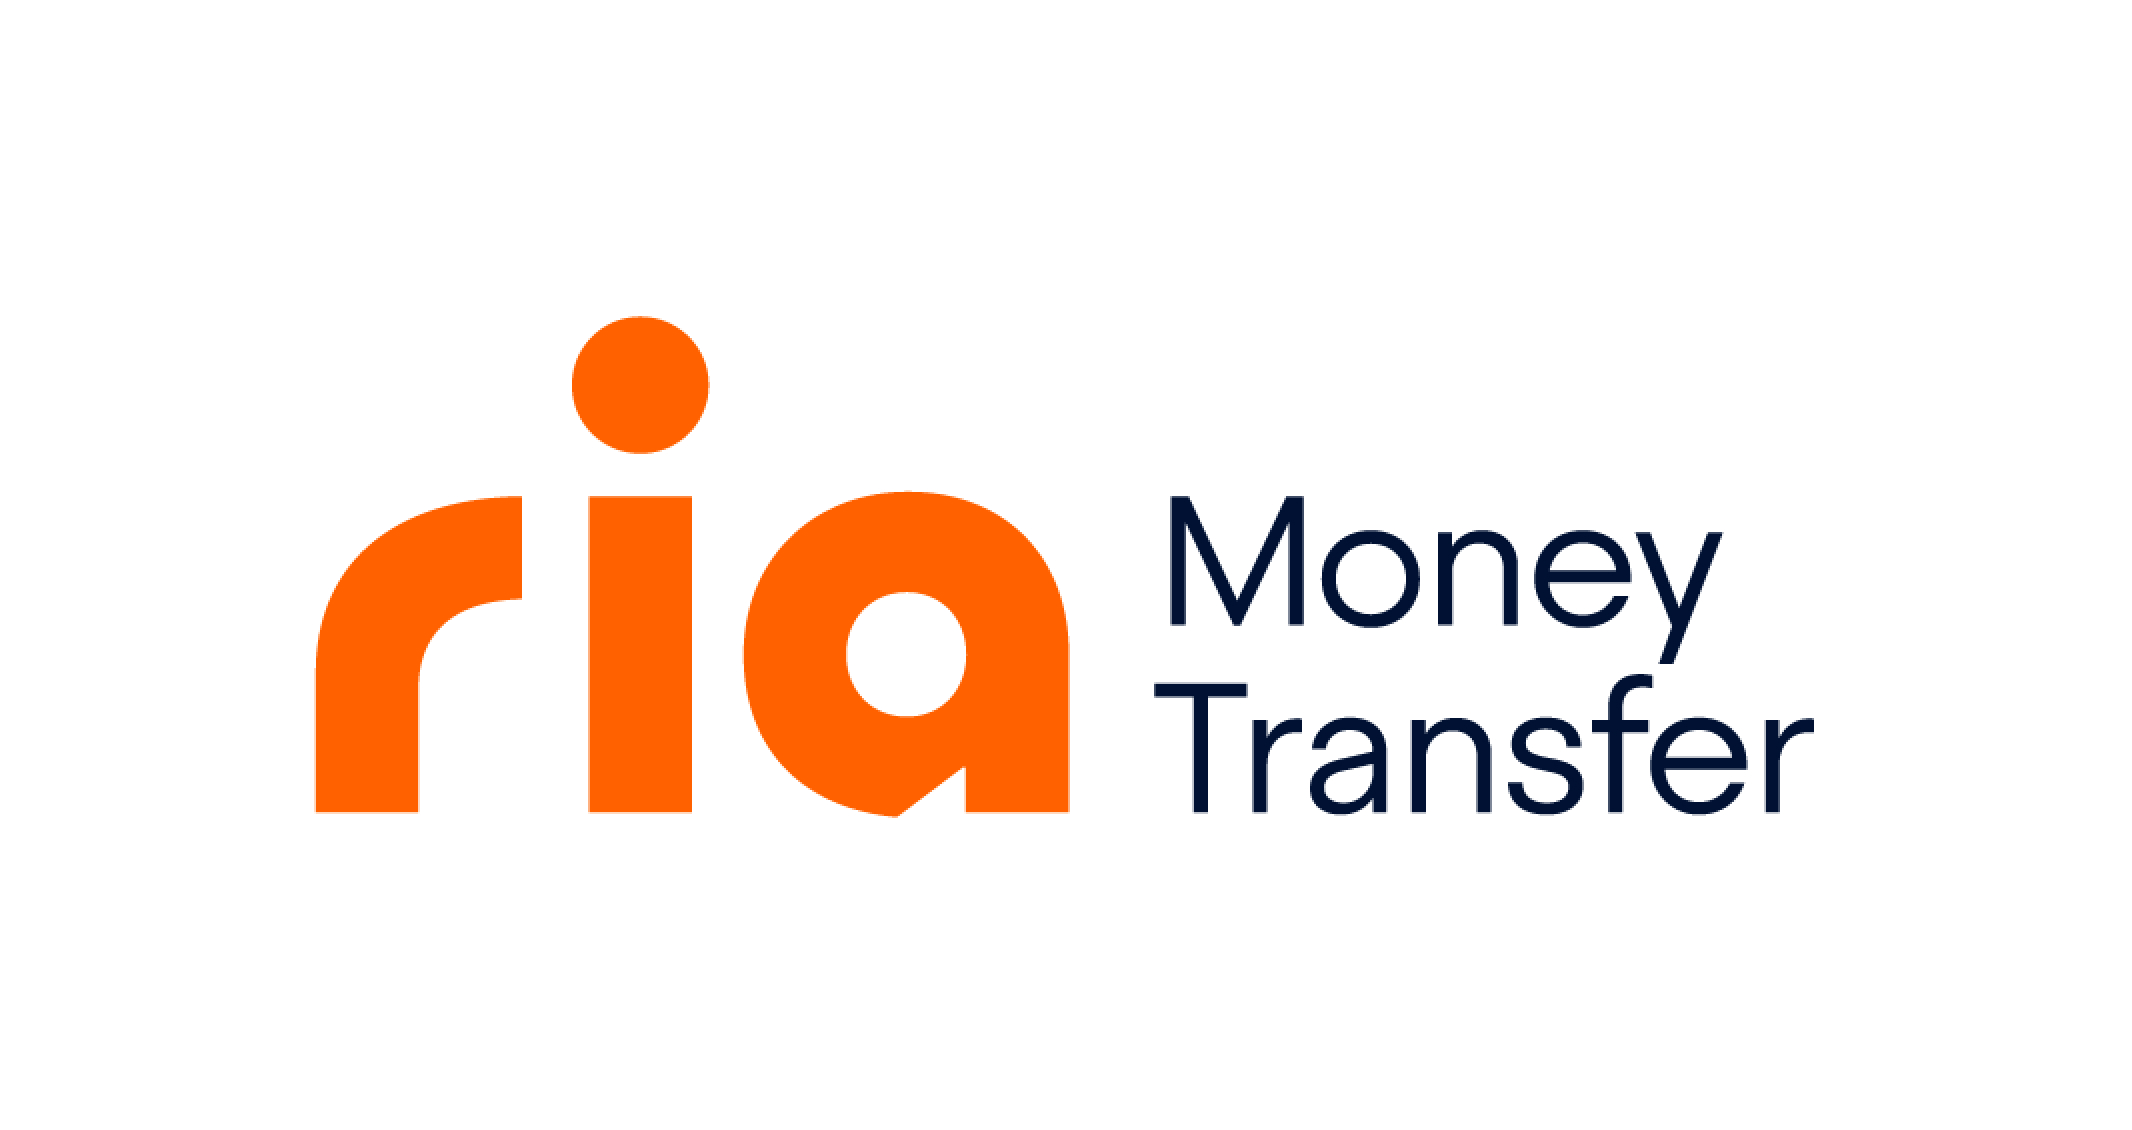 Money Transfer - Financial Services